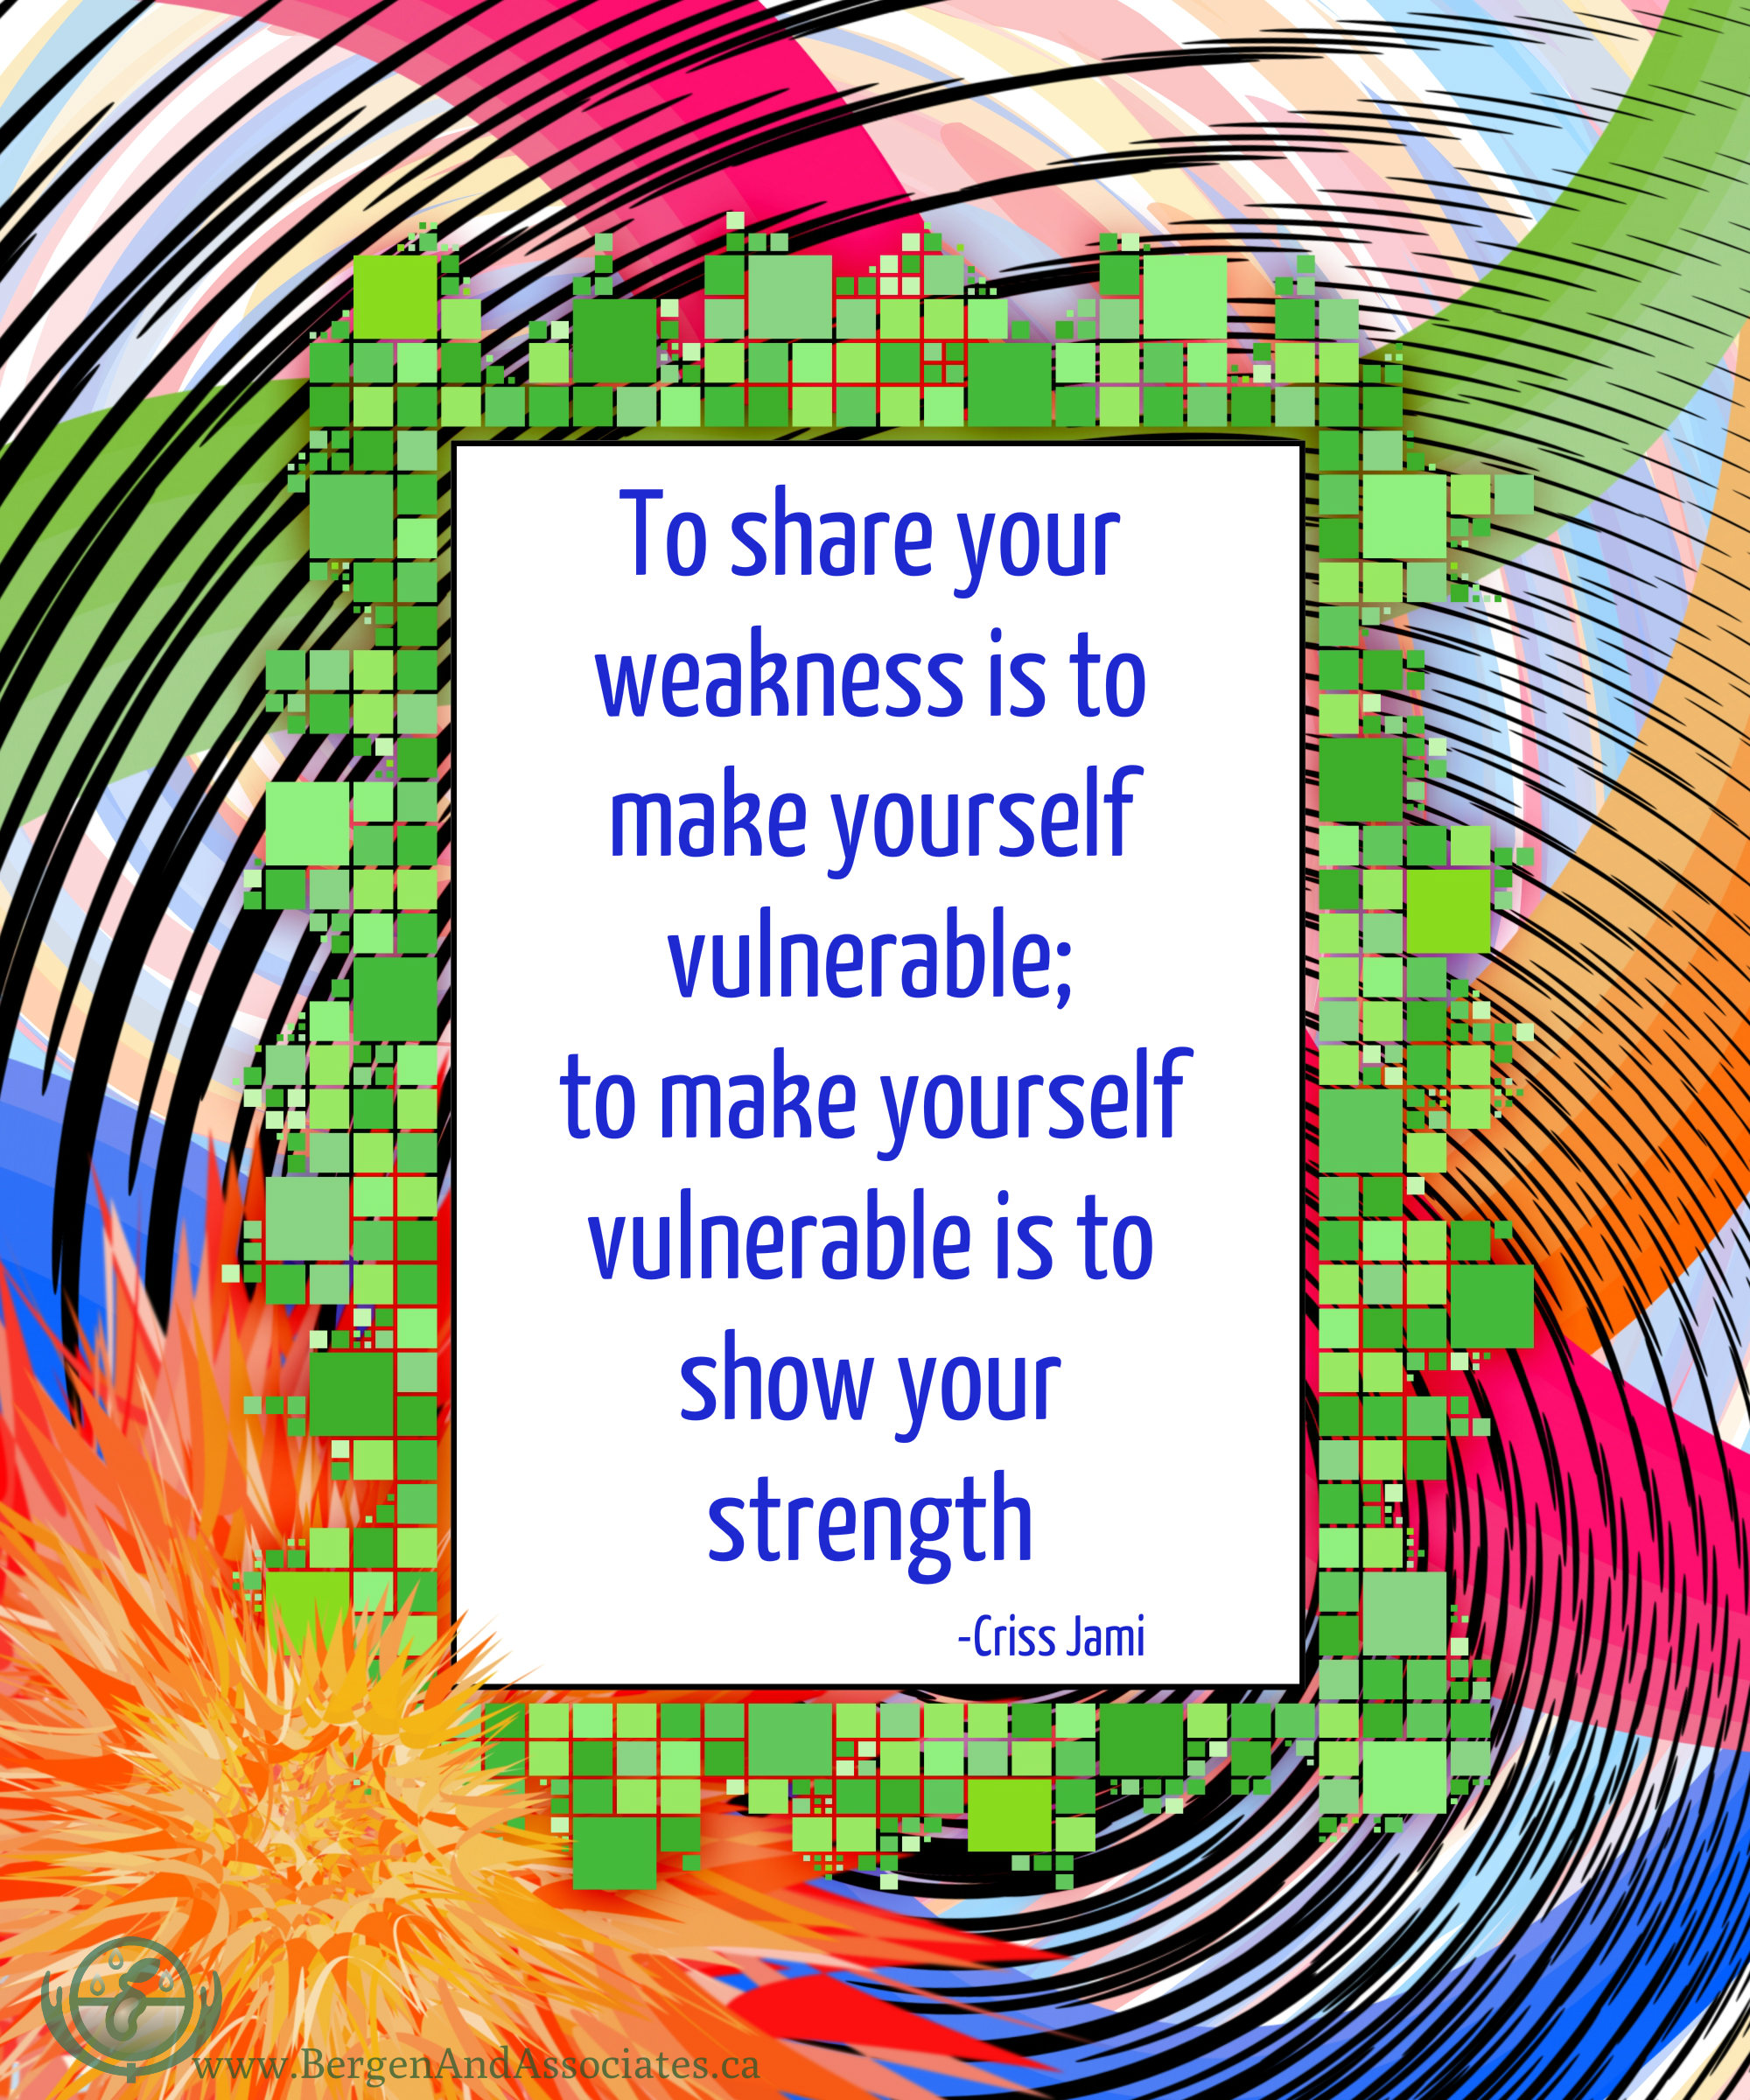 To share your weakness is to make yourself vulnerable, to make yourself vulnerable is to show your strength. quote by Jami cress